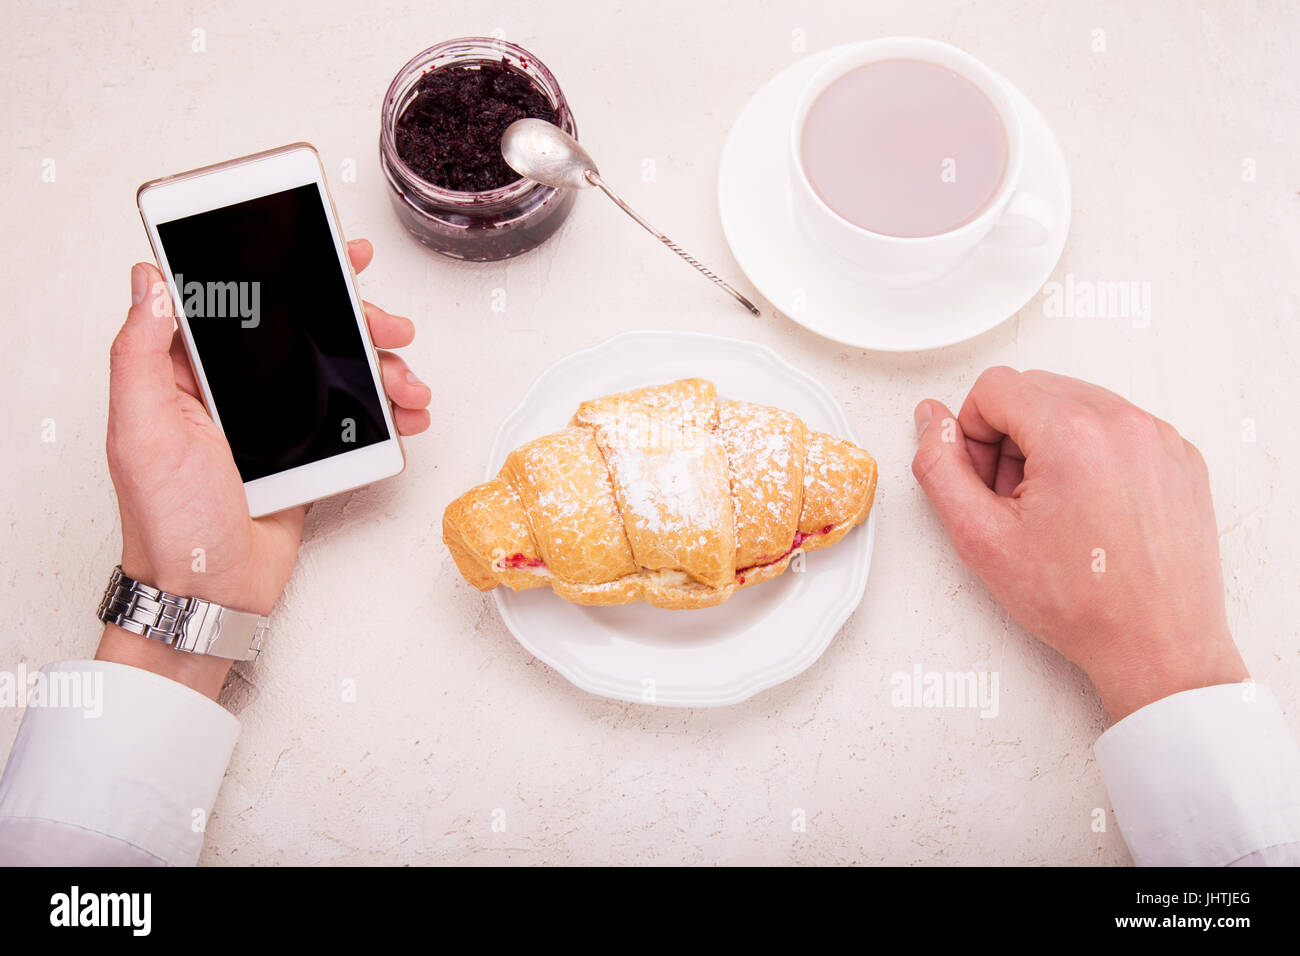 Croissant with raspberry jam, cocoa in a mug, in hand mobile phone. Business breakfast concept. Stock Photo